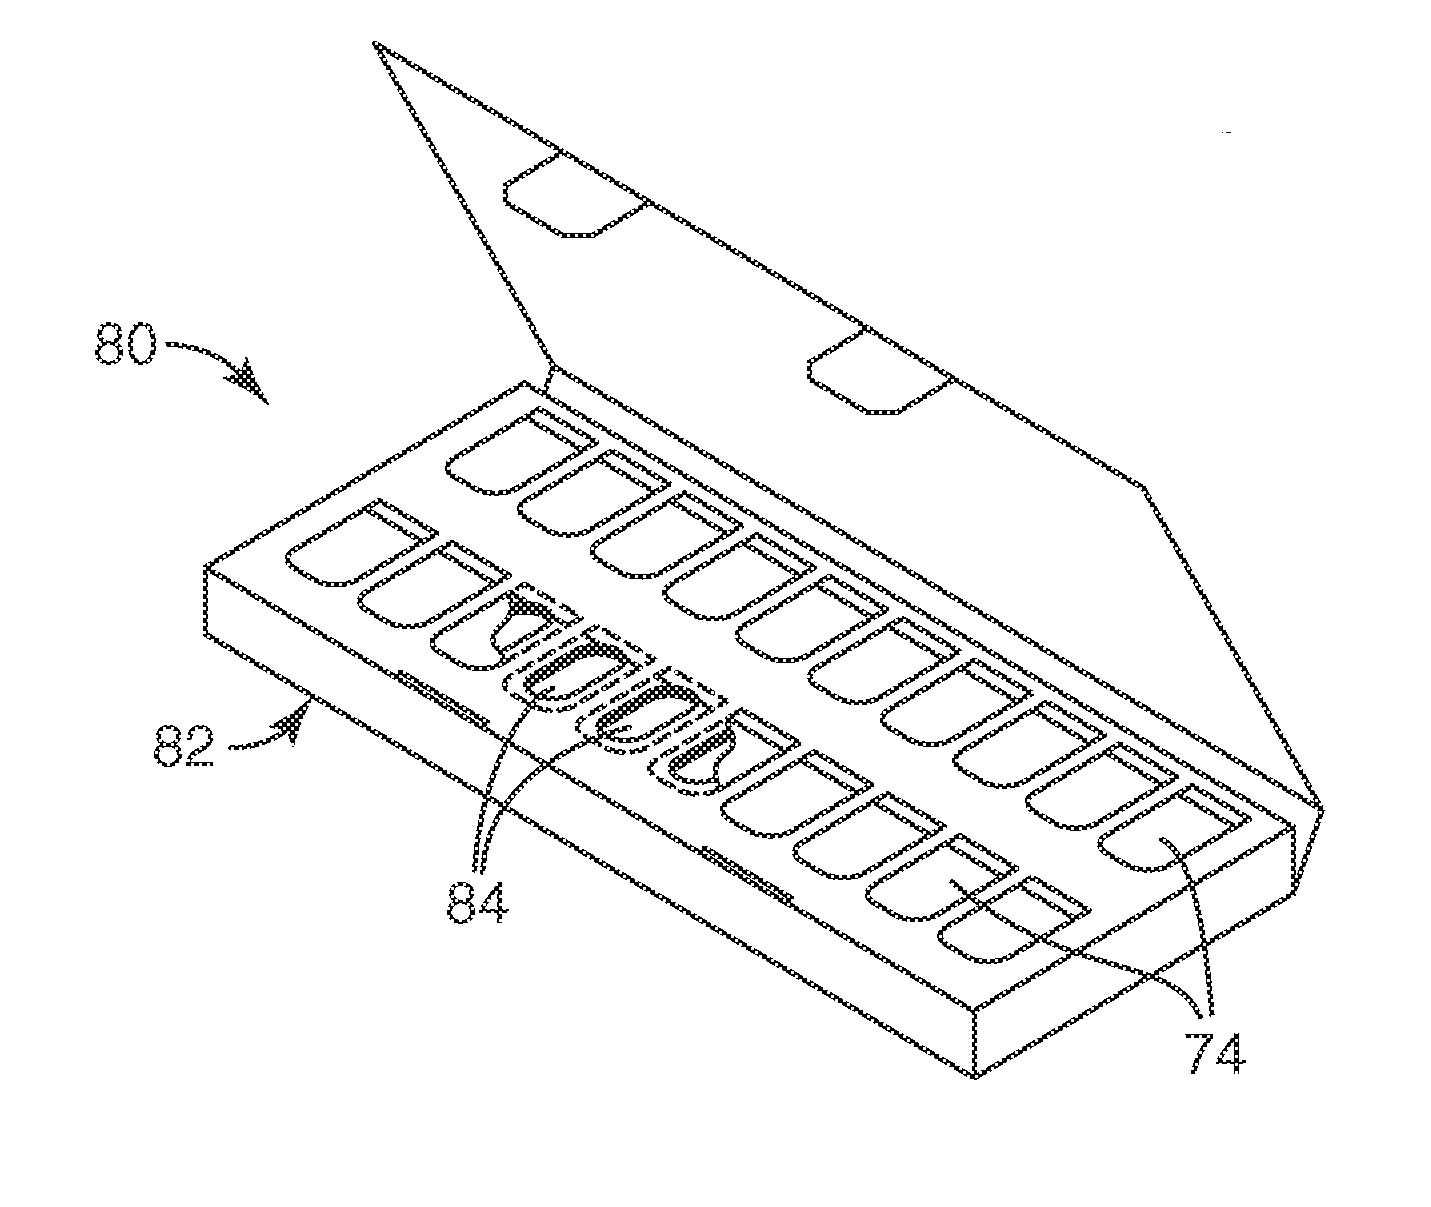 Packaged orthodontic assembly with adhesive precoated appliances